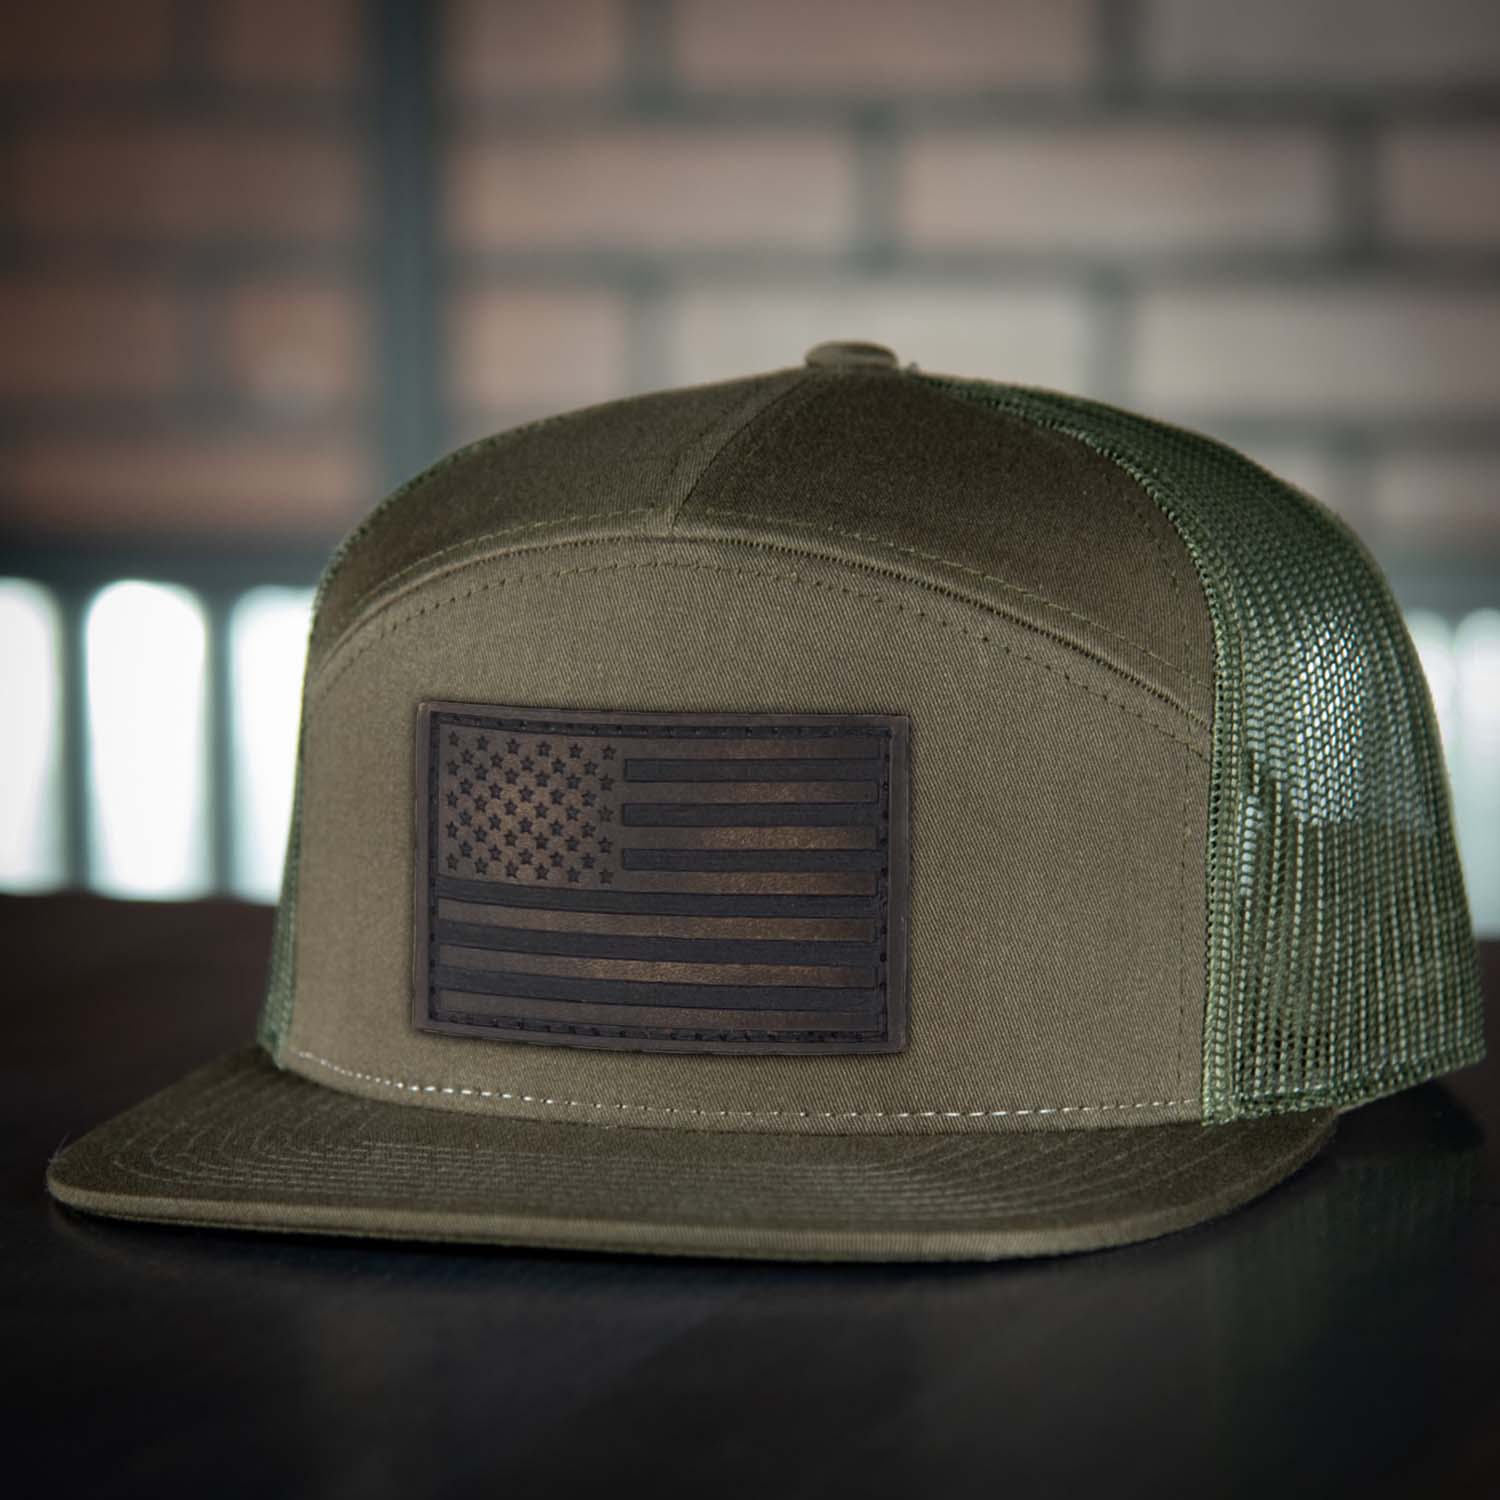 Revolution Mfg full grain leather American flag patch on a 7 panel trucker hat in loden with loden mesh